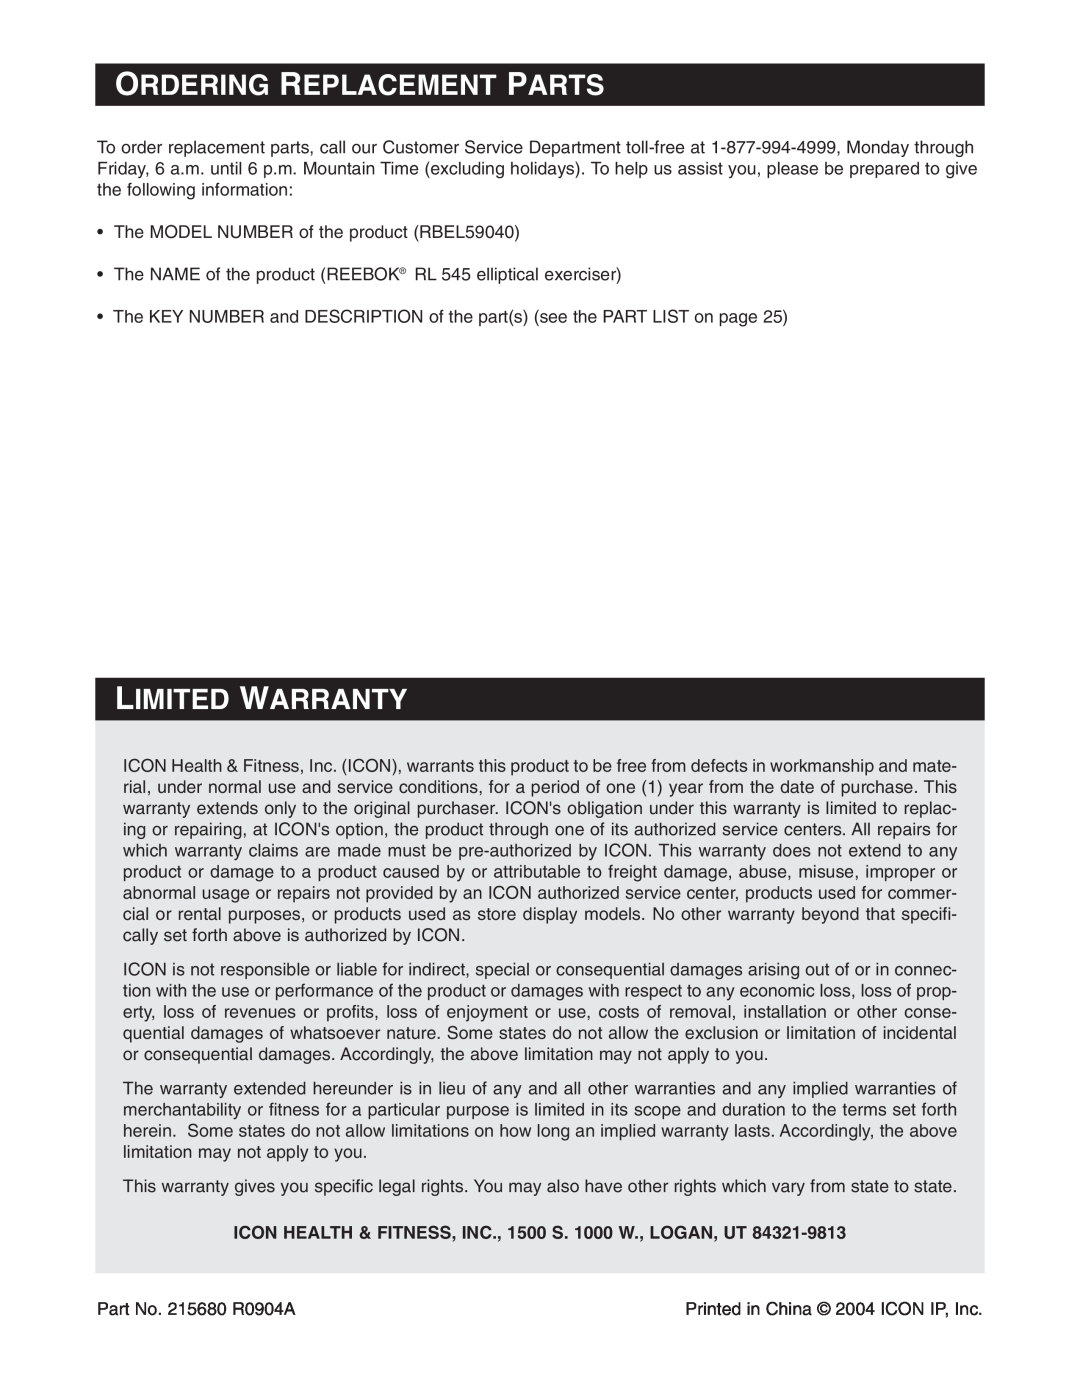 Reebok Fitness RBEL59040 manual Ordering Replacement Parts, Limited Warranty 